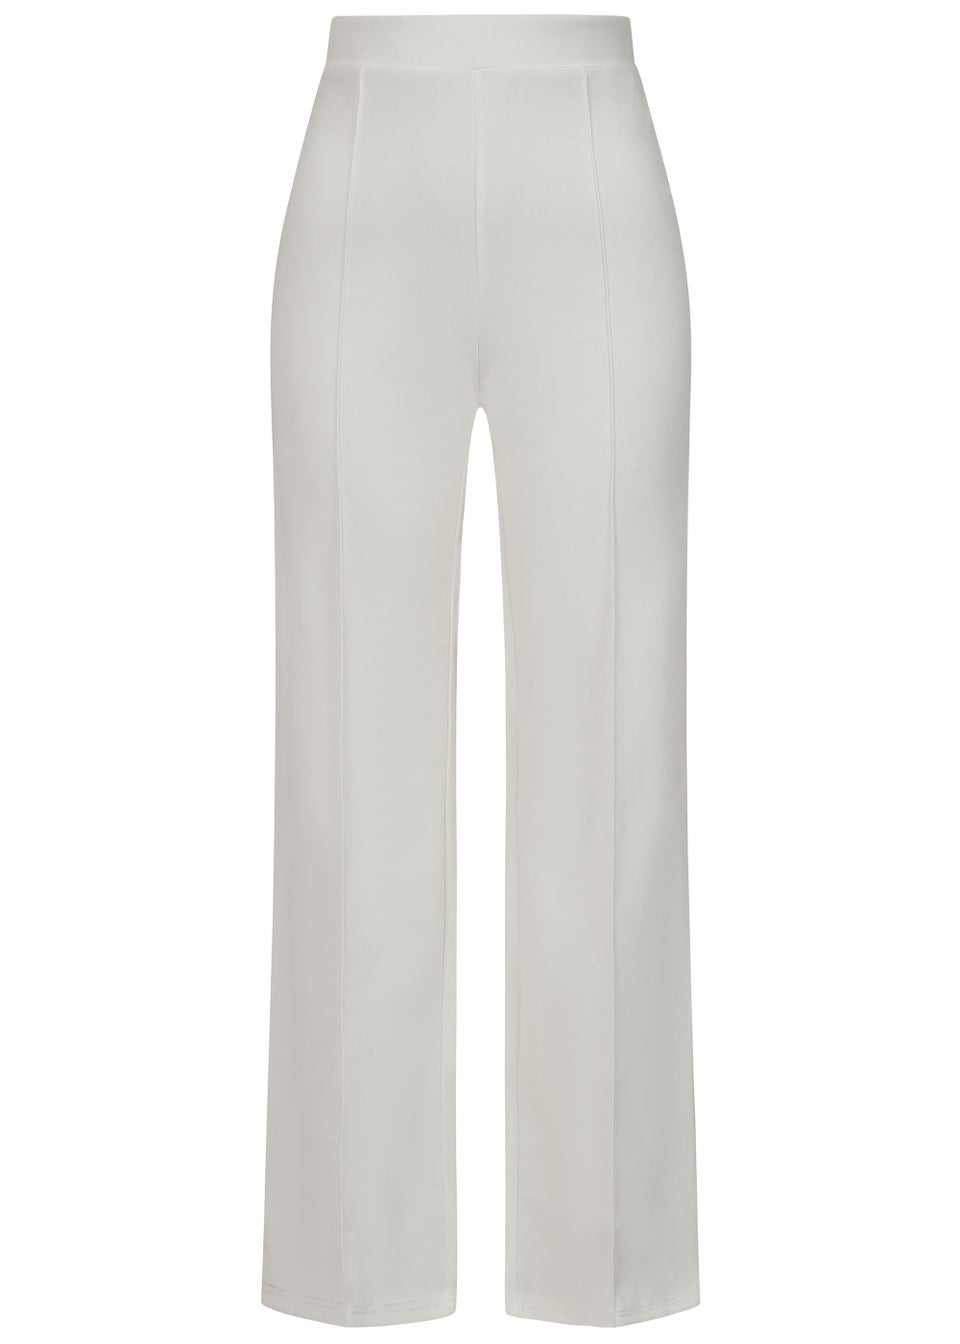 Girls on Film by Dani Dyer Ivory Wide Leg Co-Ord Trousers